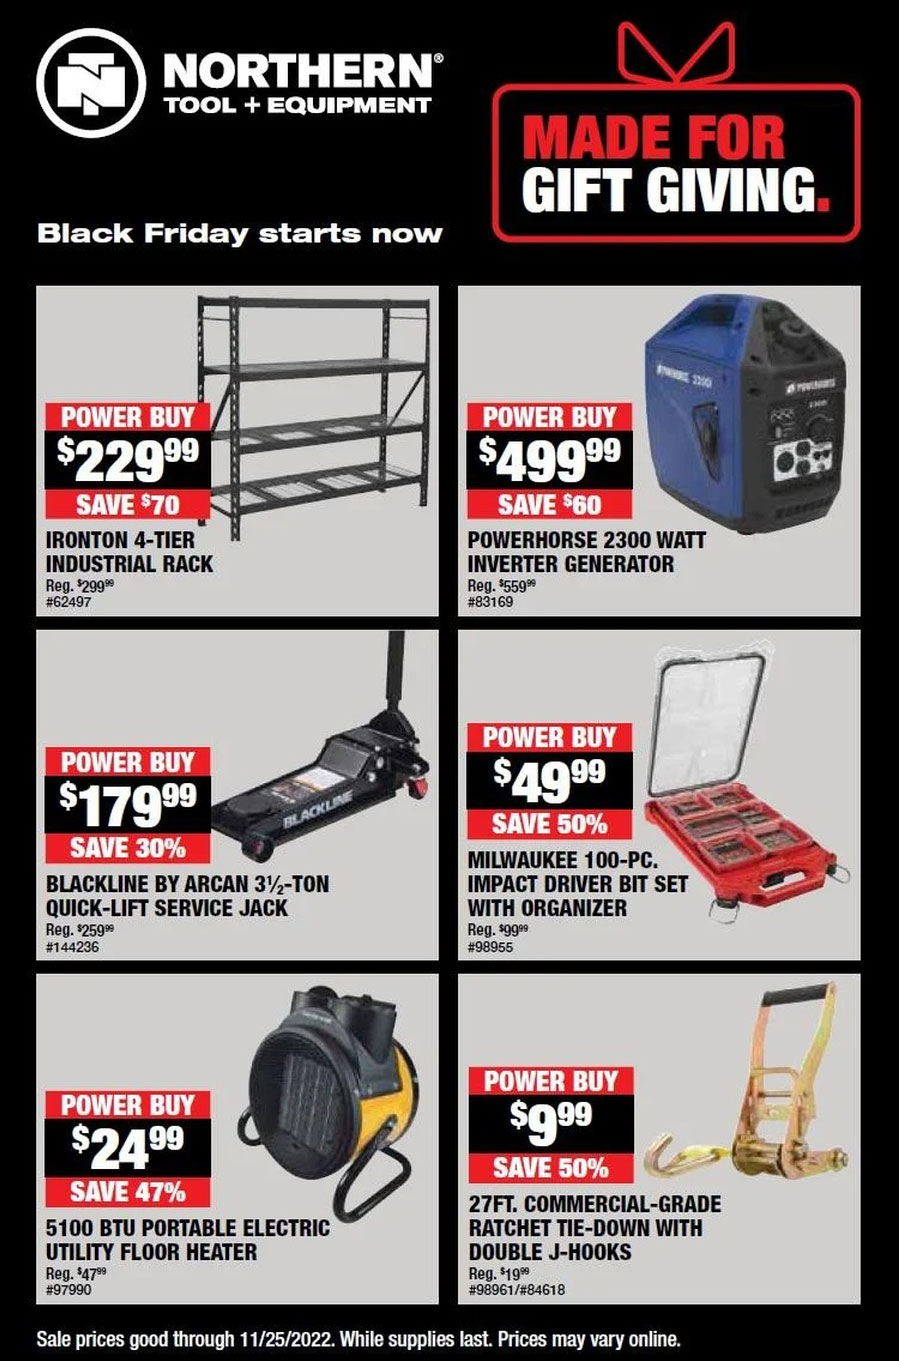 Northern Tool Black Friday 2022 Ad and Deals - Does Sprint Have Any Black Friday Deals